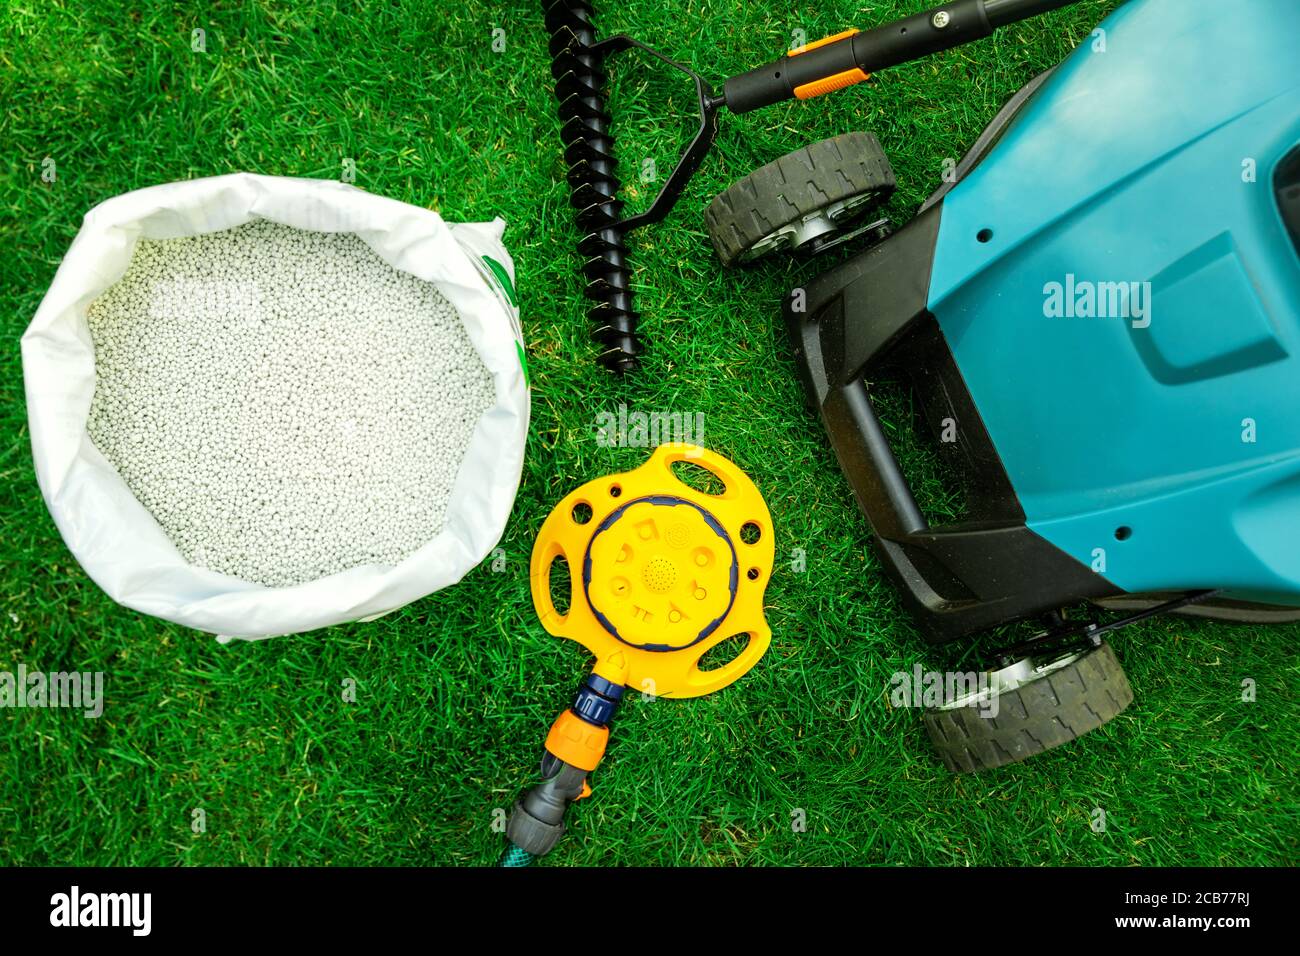 lawn care tools and equipment for perfect green grass. top view Stock Photo